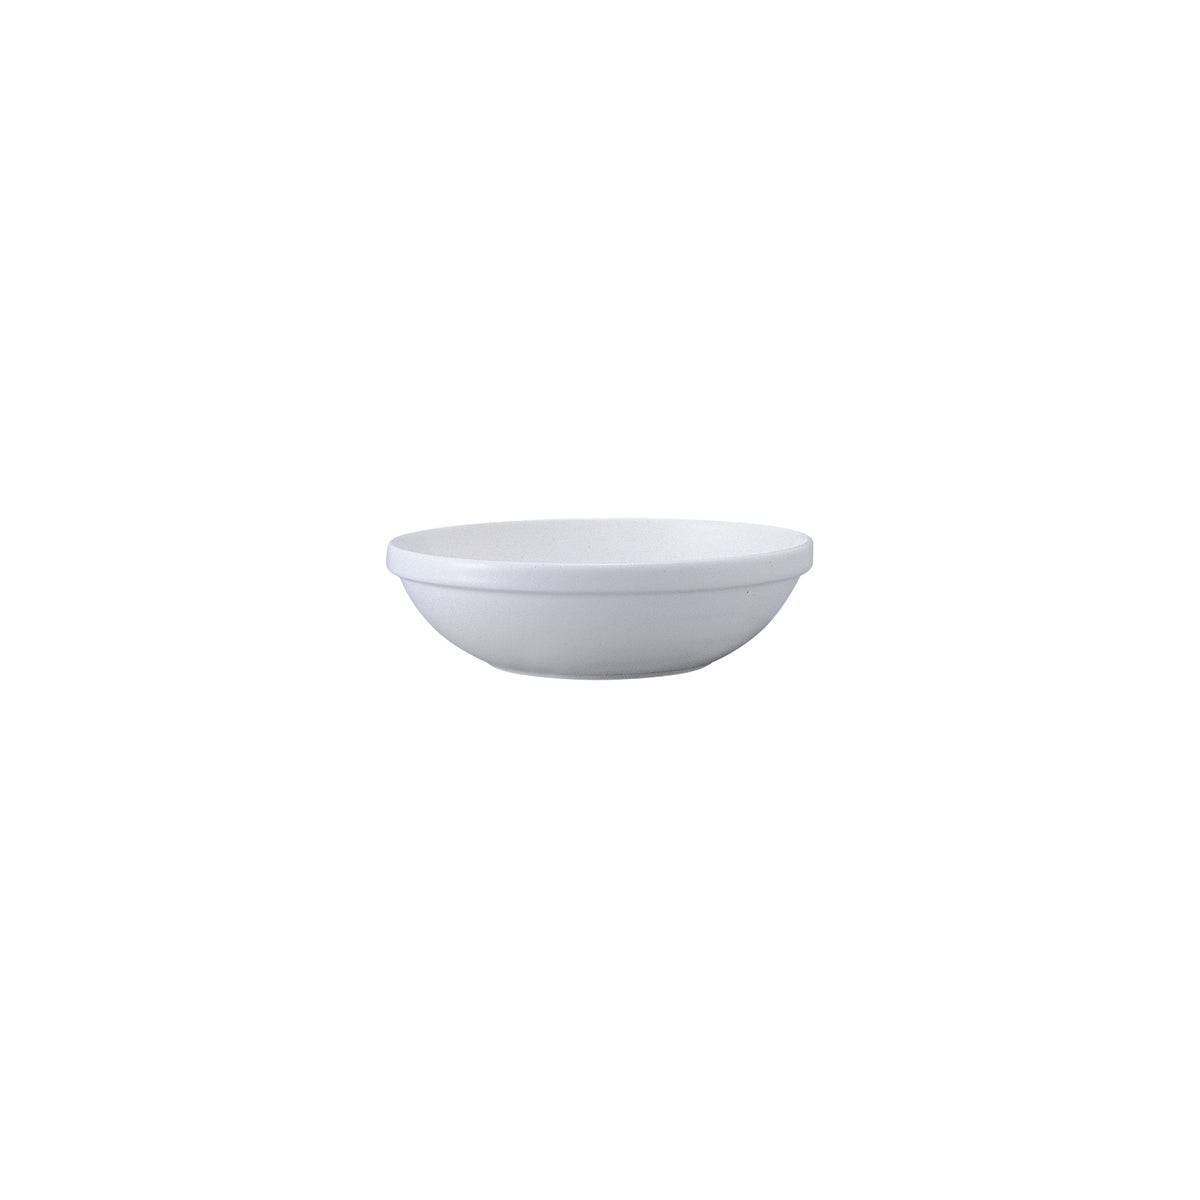 VB16-2155-3190 Villeroy And Boch Villeroy And Boch Easy White Salad Bowl No. 3 180mm / 500ml Tomkin Australia Hospitality Supplies